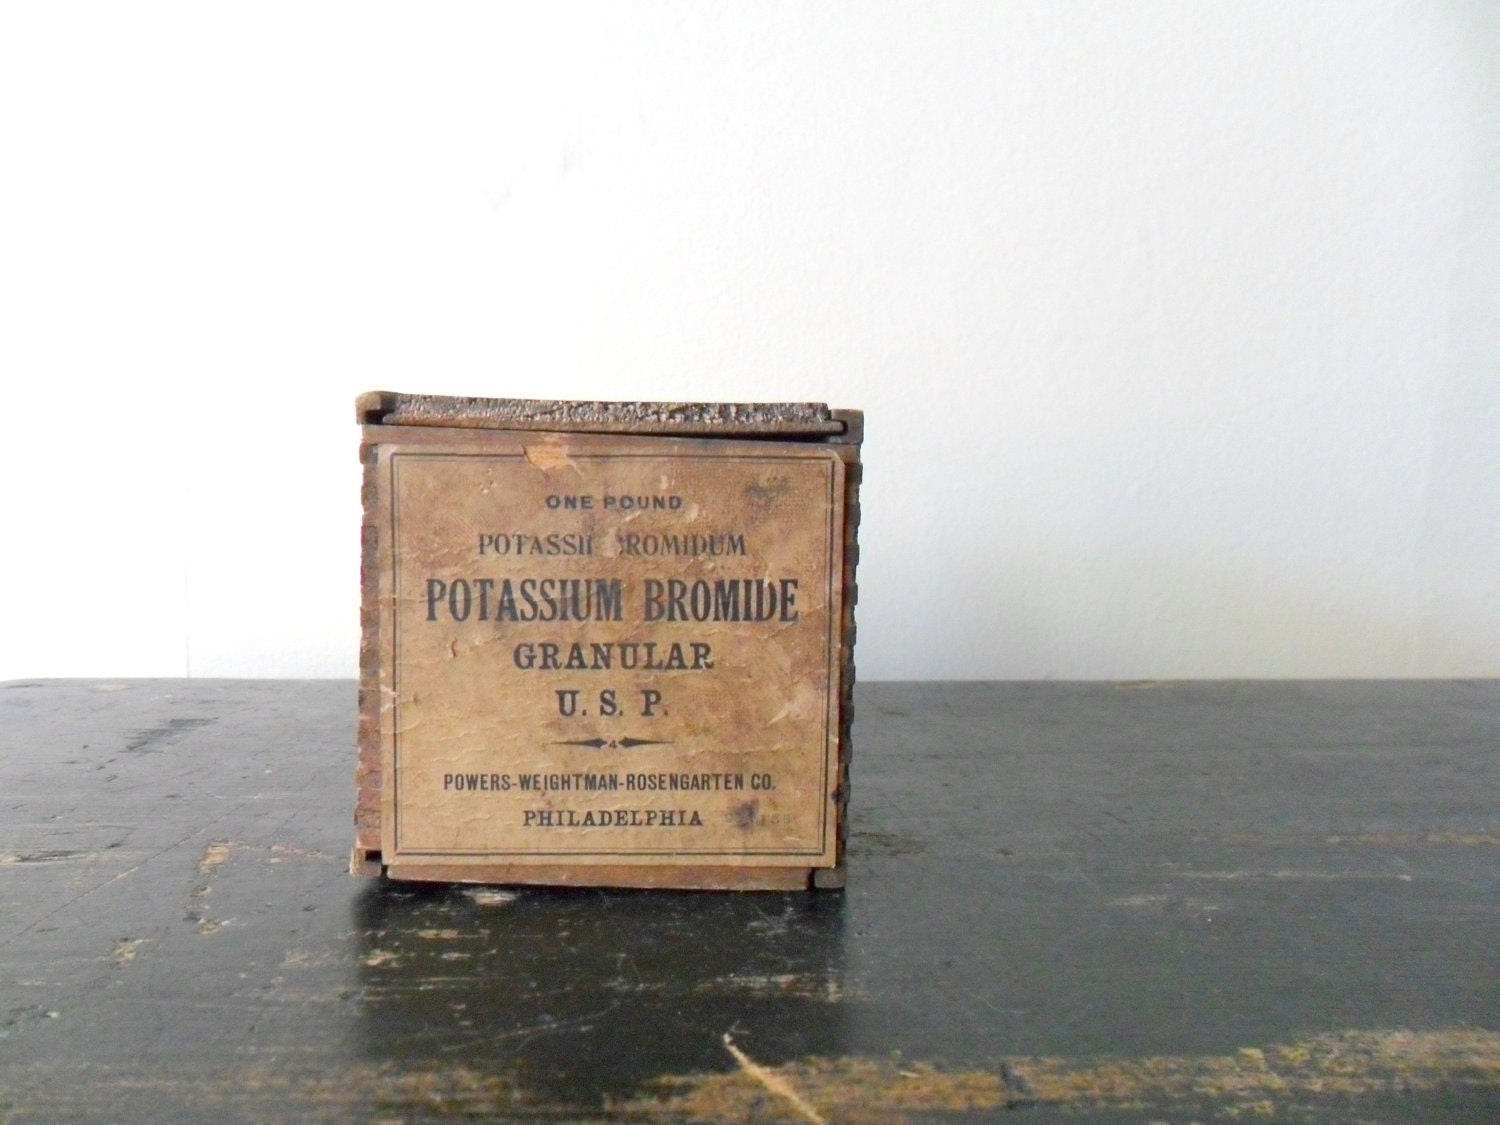 ANTIQUE PORTABLE APOTHECARY SCALE WOODEN BOX WEIGHTS (04/04/2010)